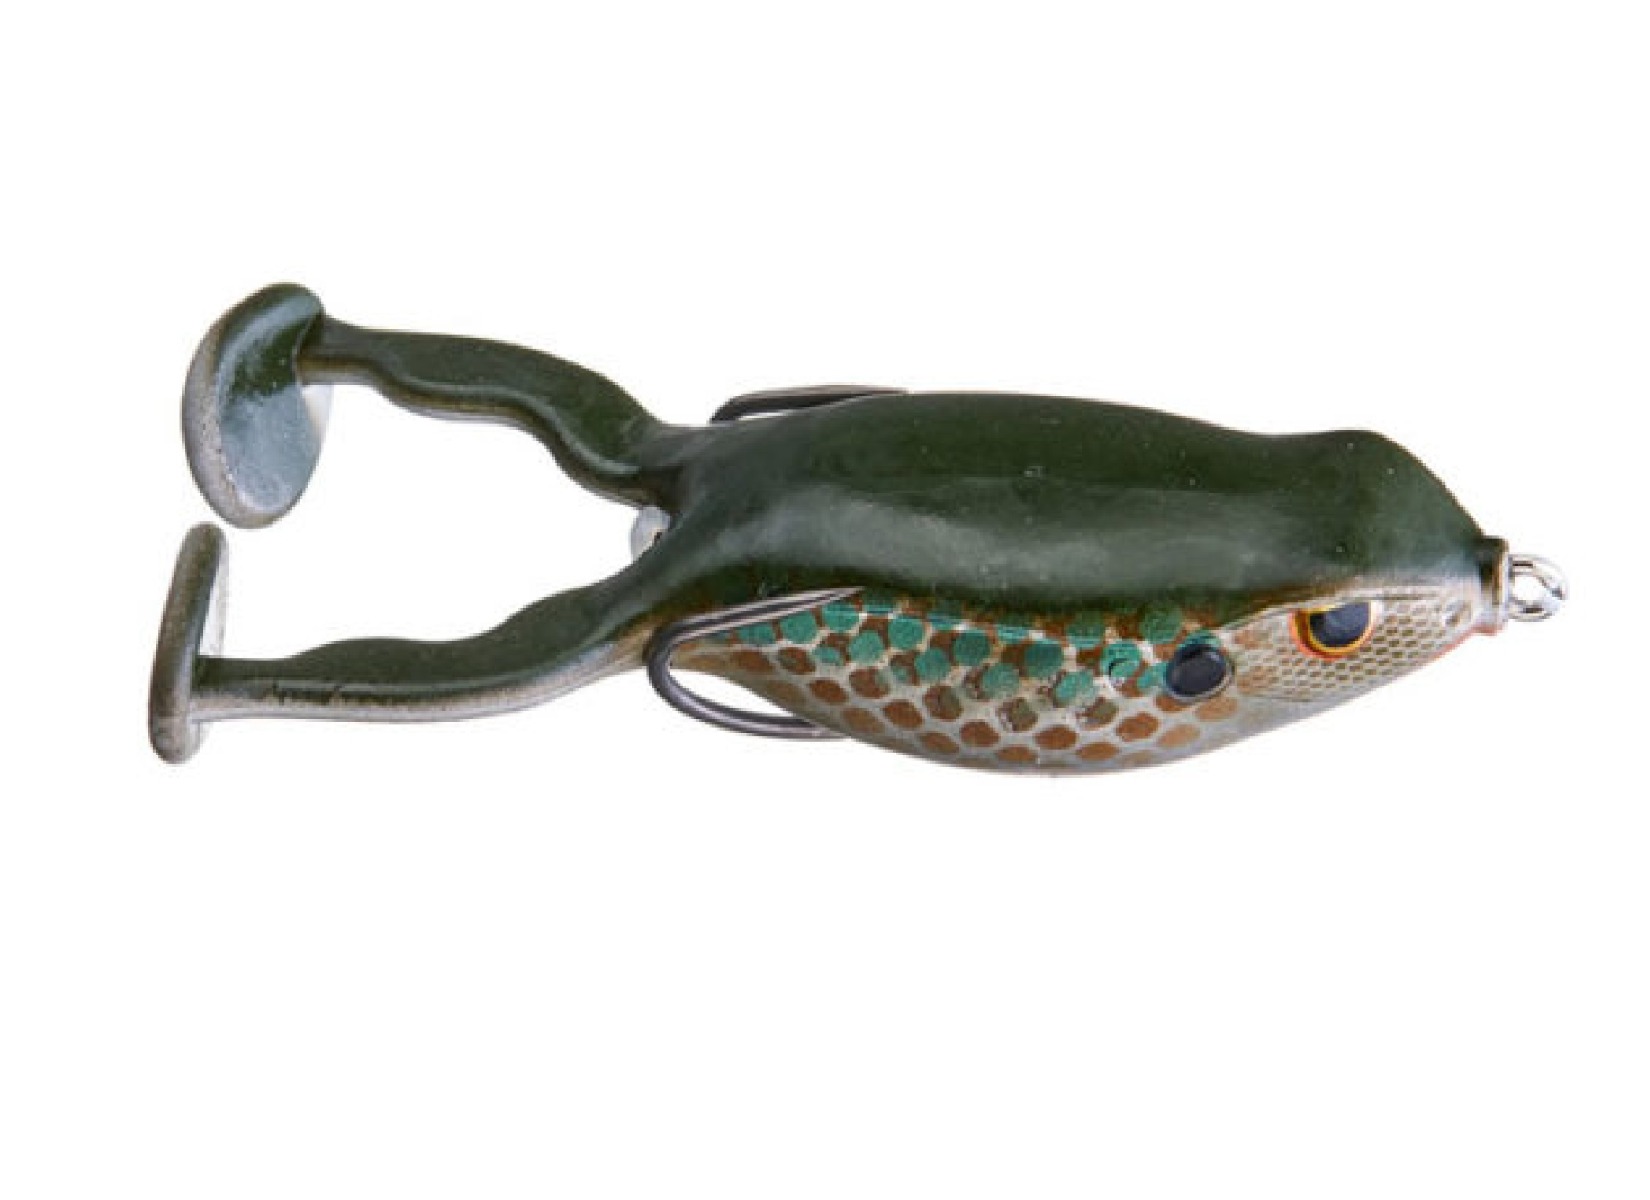 Spro Flappin Frog 65 Red Ear